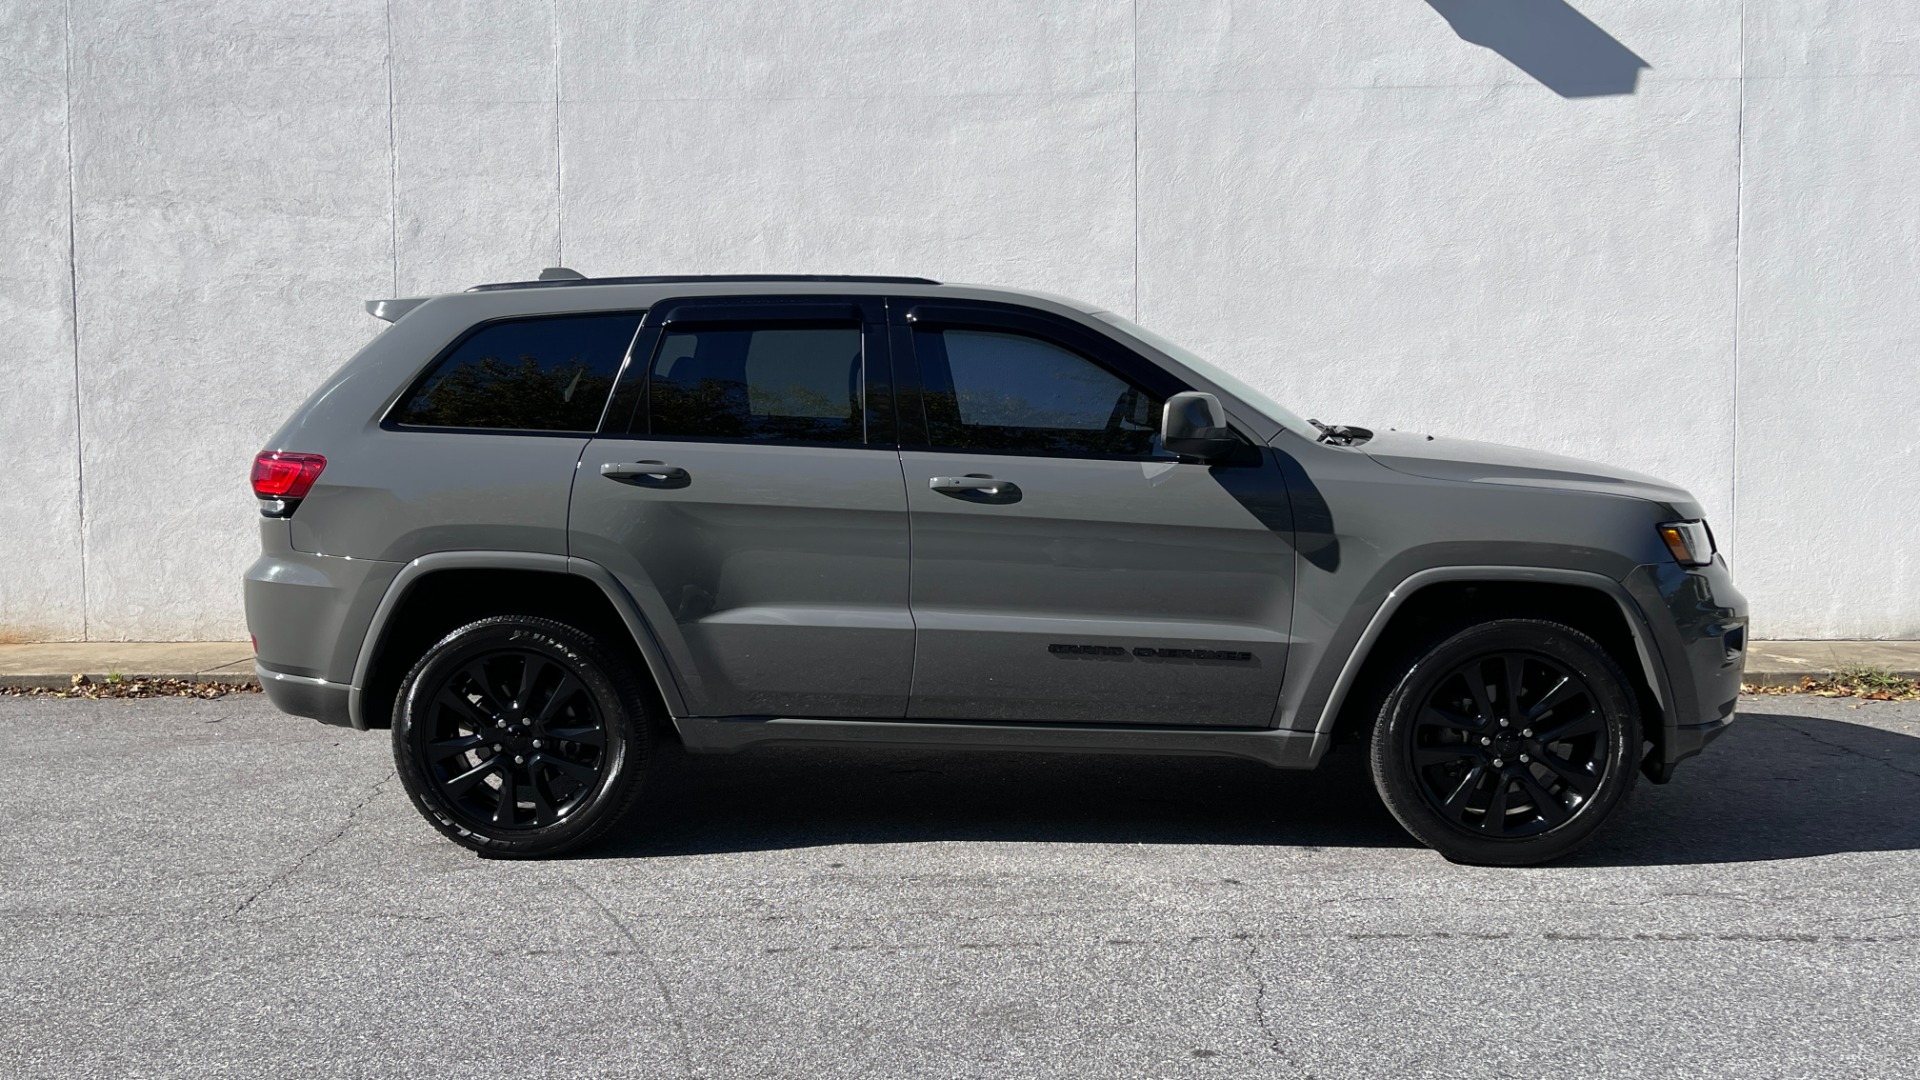 Used 2019 Jeep Grand Cherokee ALTITUDE / BLACK 20IN WHEELS / BLACK TRIM / SUNROOF / HEATED SEATS for sale $34,495 at Formula Imports in Charlotte NC 28227 3